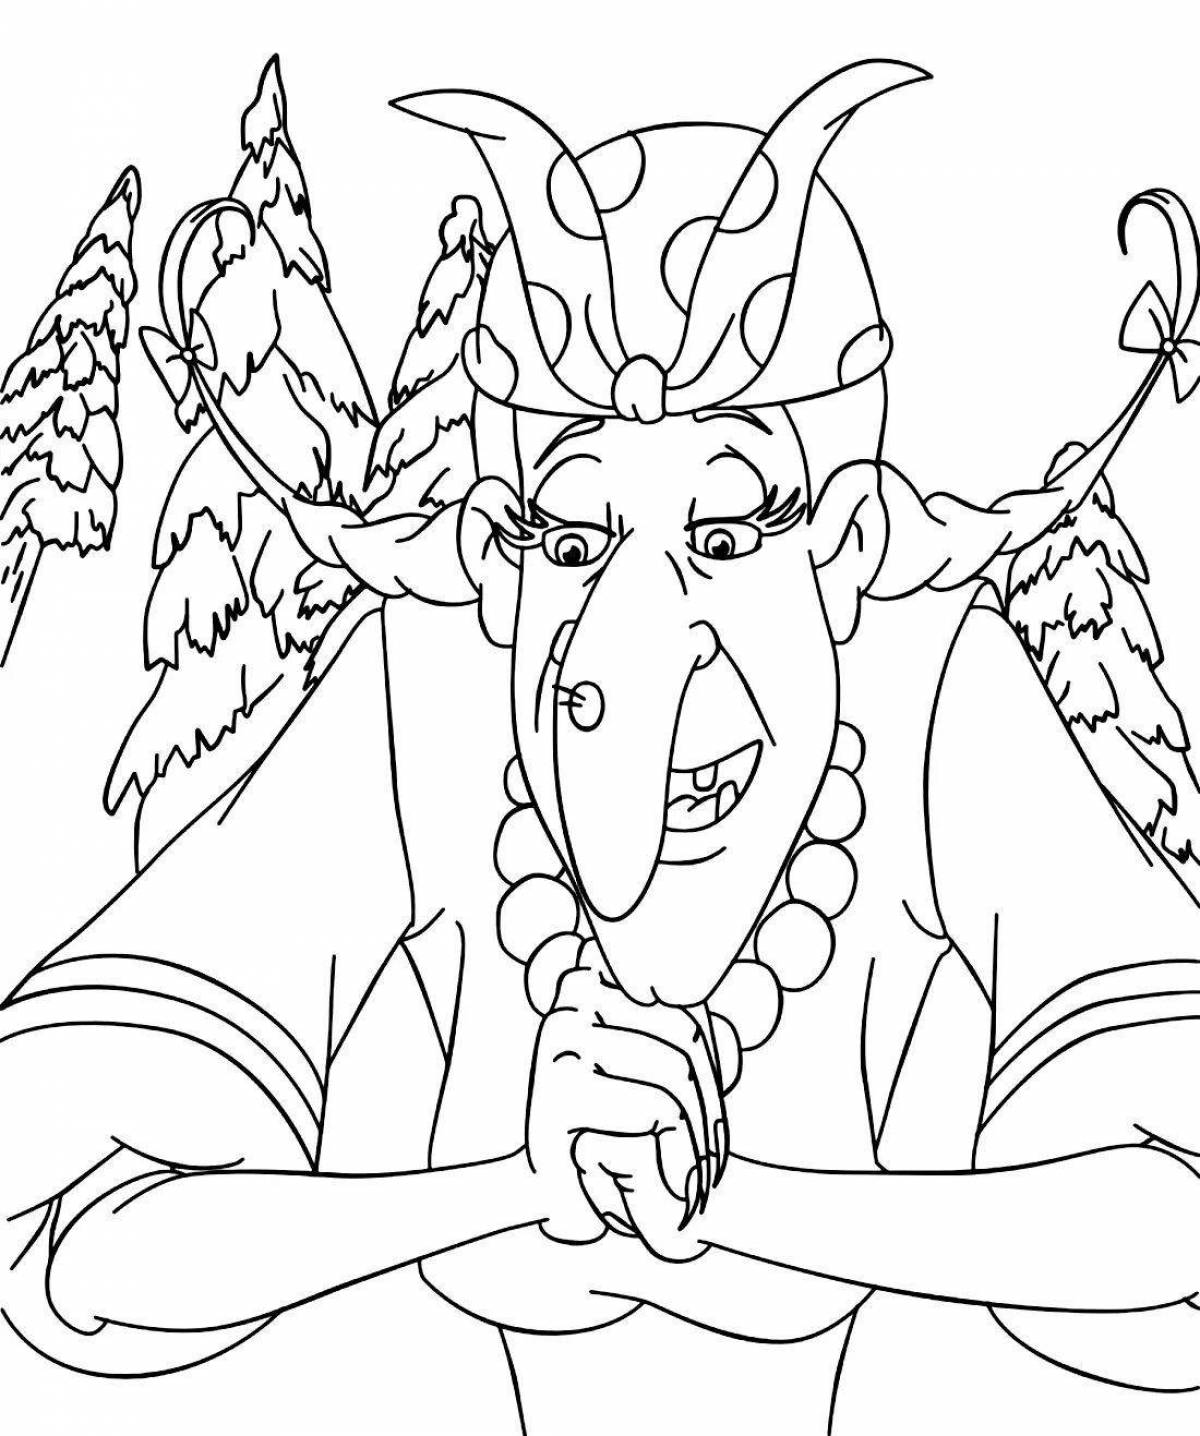 Shiny Shamakhan queen coloring book